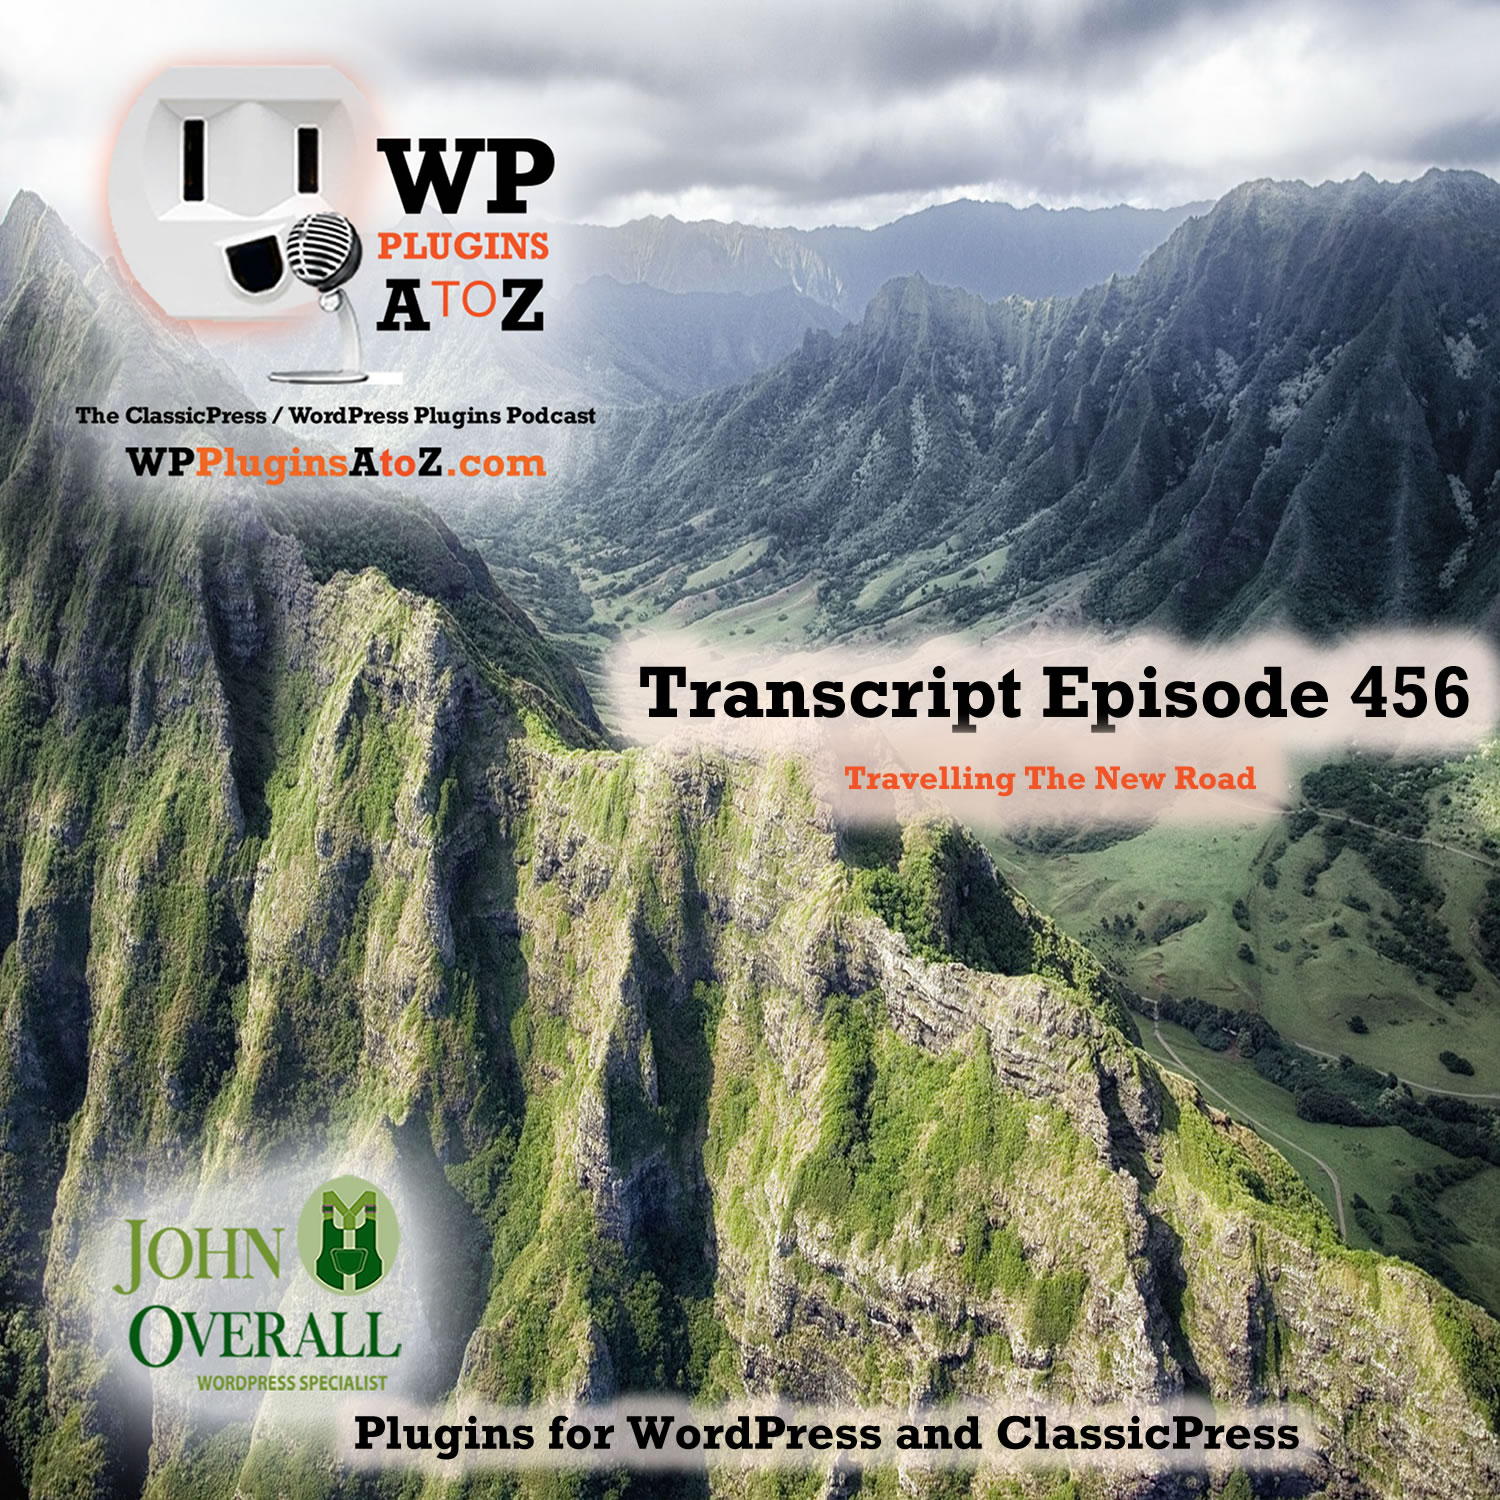 It's Episode 456 with plugins for Migration & Searching, Emailing & Posts Queries, SEO, Tracking the Virus, and ClassicPress Options. It's all coming up on WordPress Plugins A-Z!